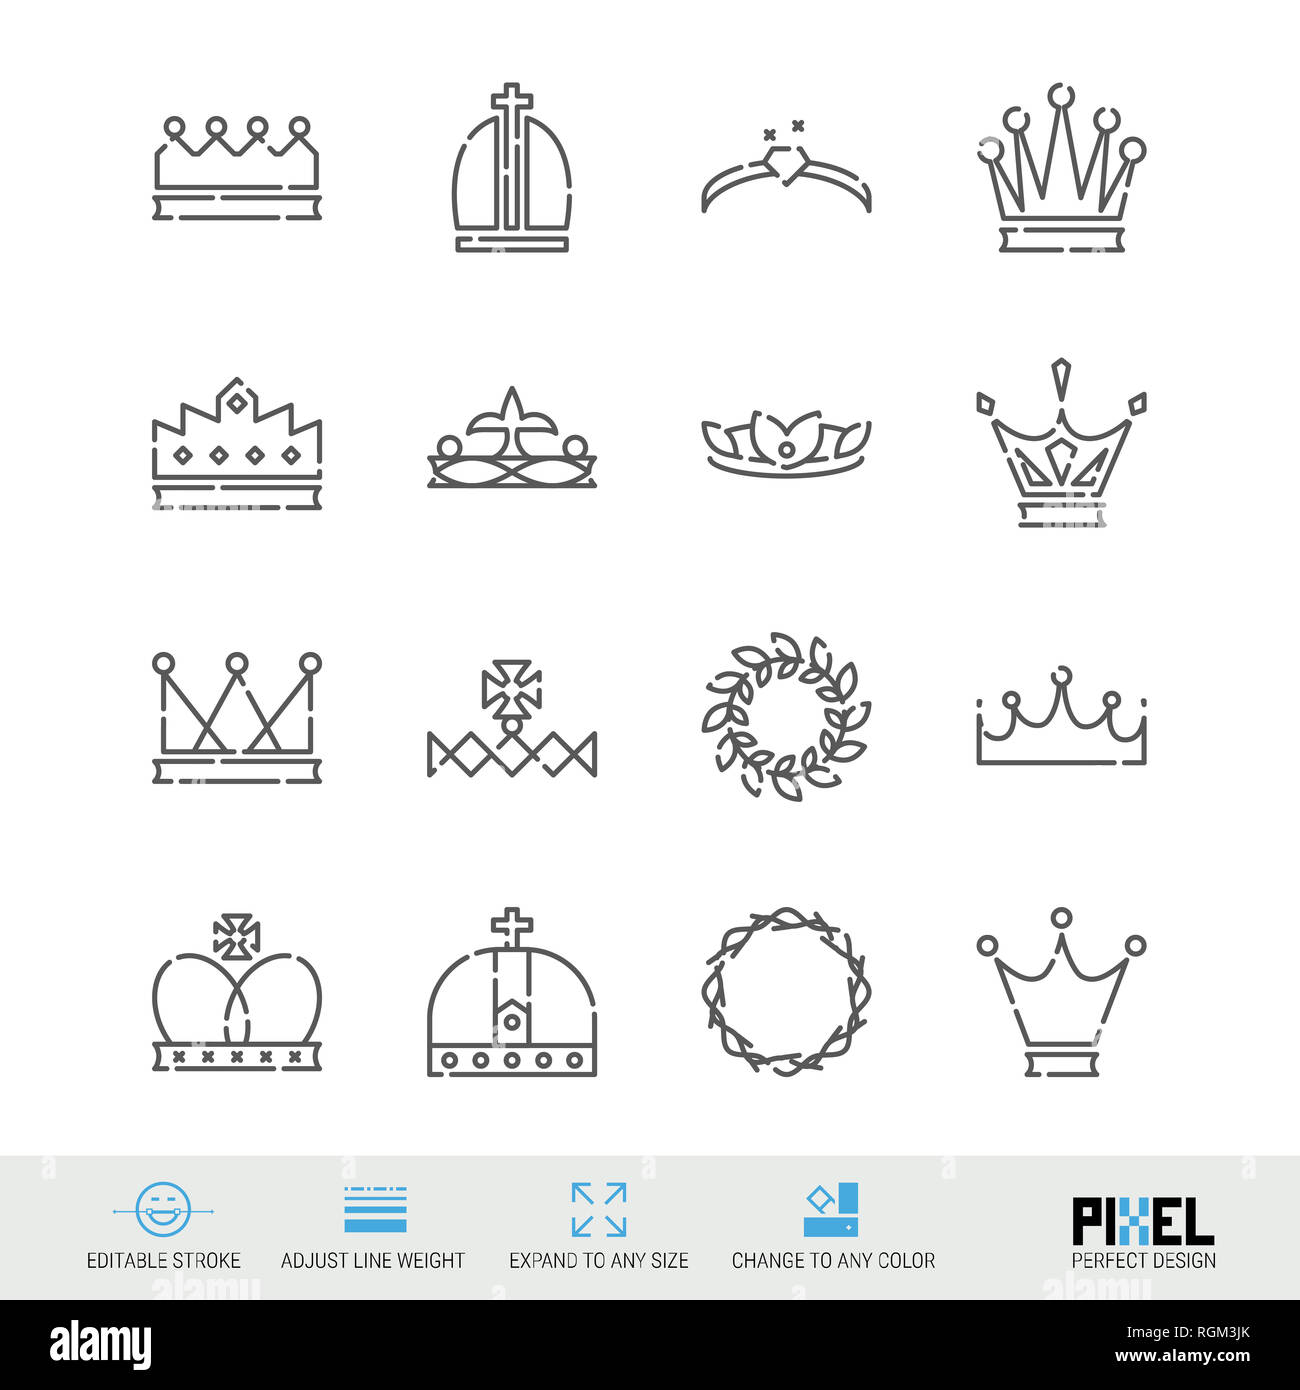 Line Icon Set. Success, Crowns, Achievment Related Icons. Royal Symbols, Pictograms, Signs. Pixel Perfect Design. Editable Stroke. Adjust Line Weight. Stock Photo